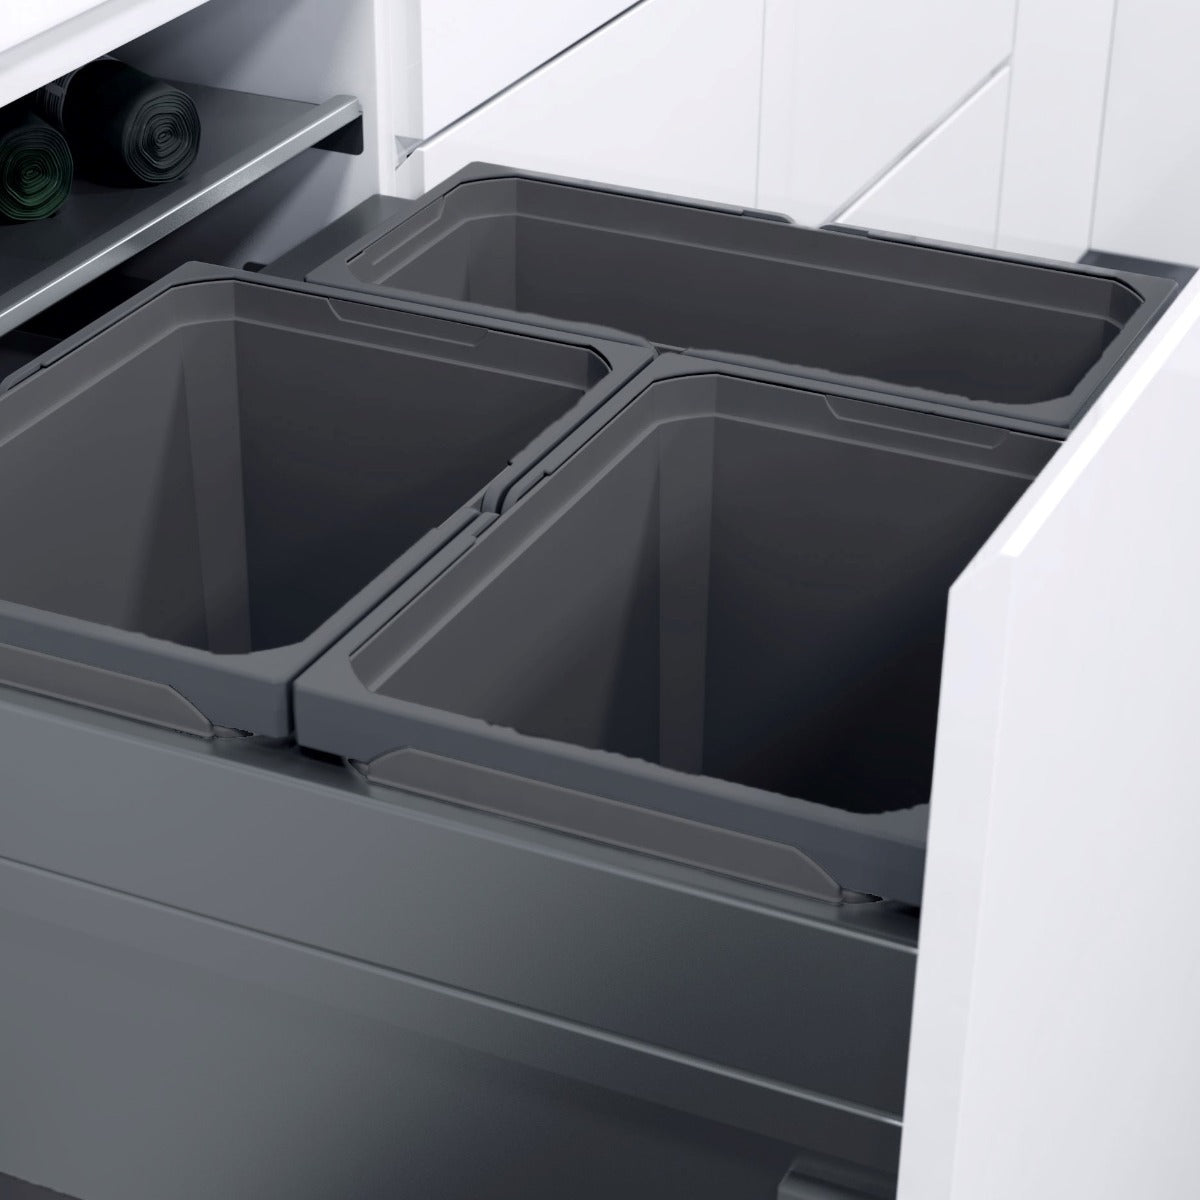 Vauth-Sagel integrated kitchen bin in lava grey with three compartments, ideal for separating waste and recycling